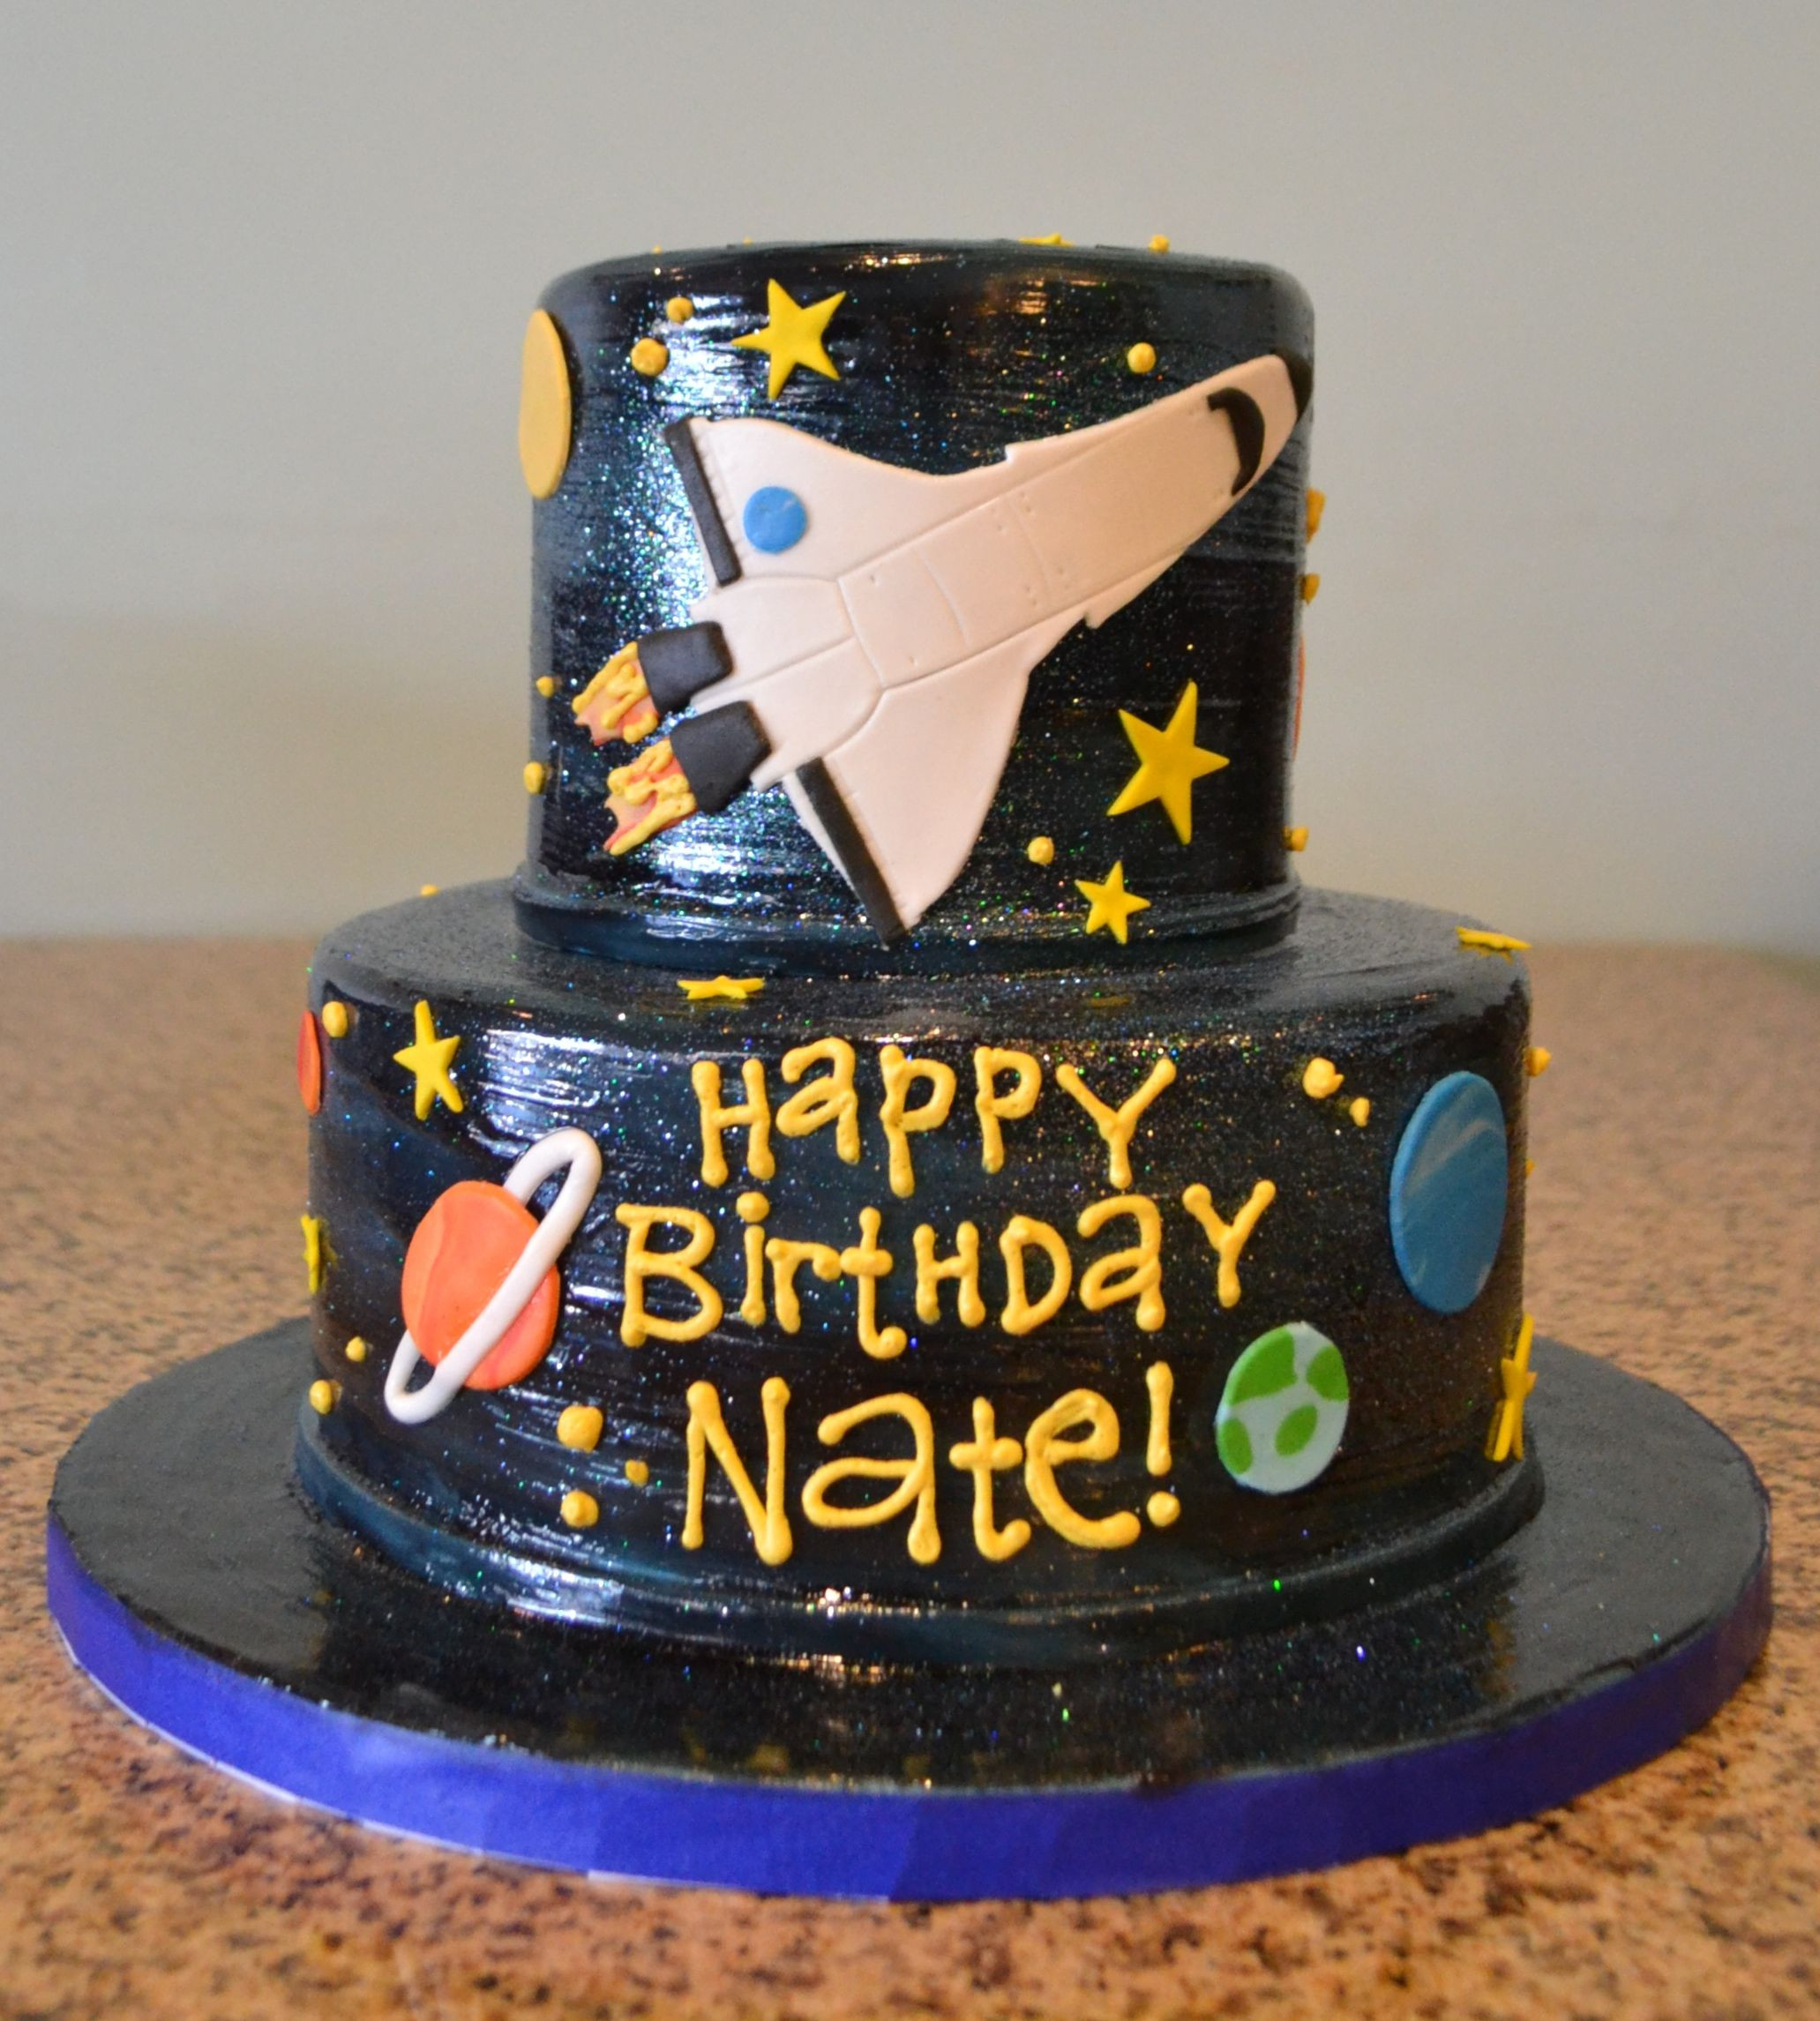 Birthday Party Ideas Raleigh Nc
 20 Best Birthday Cakes Raleigh Nc – Home Family Style